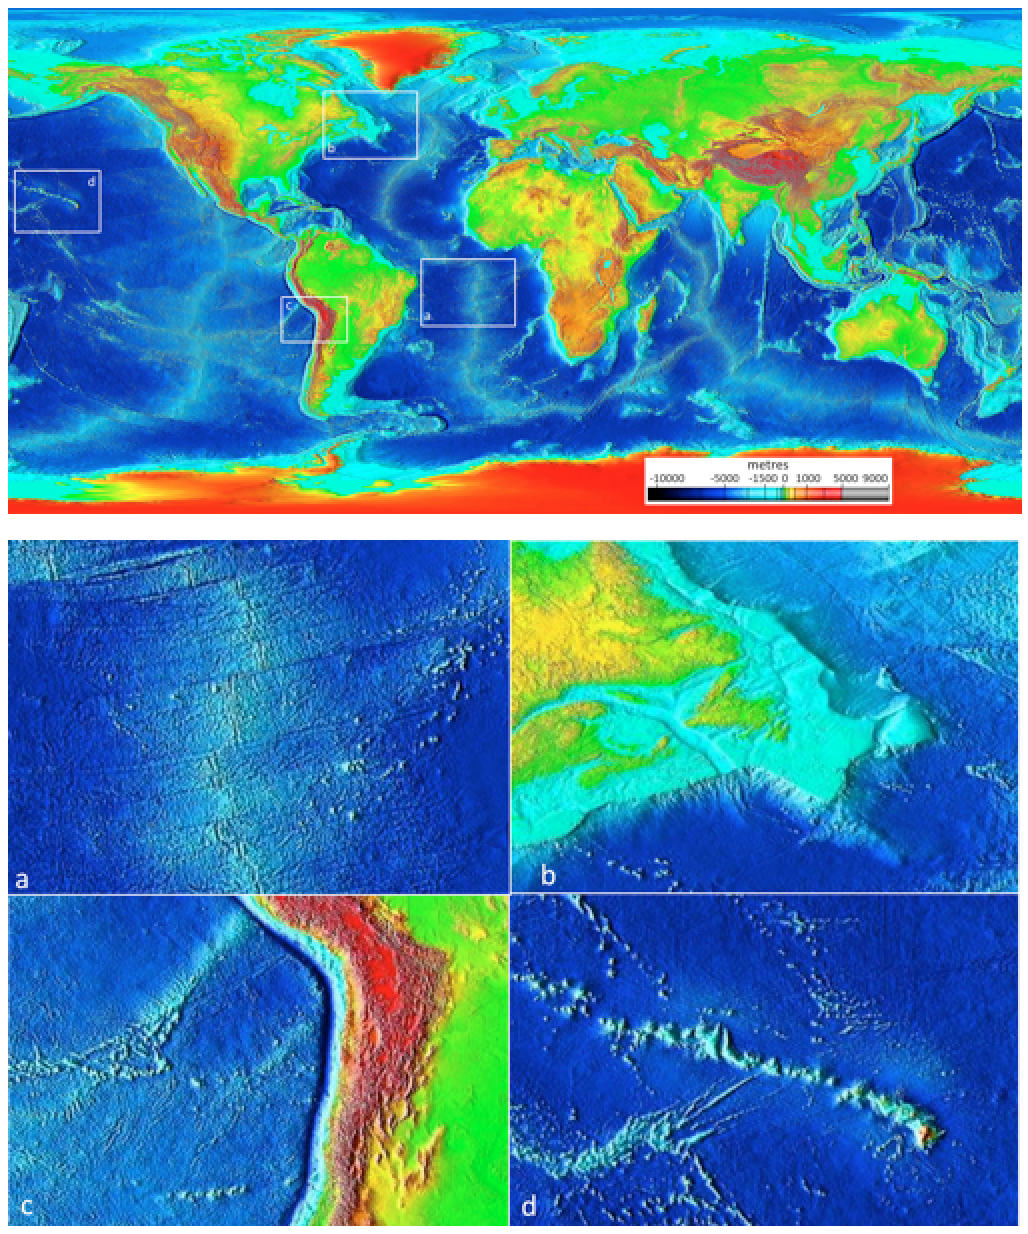 Ocean floor bathymetry (and continental topography). Inset (a): the mid-Atlantic ridge, (b): the Newfoundland continental shelf, (c): the Nazca trench adjacent to South America, and (d): the Hawaiian Island chain. _Source: Steven Earle (2015) CC BY 4.0 [view source](http://opentextbc.ca/geology/wp-content/uploads/sites/110/2015/07/image0371.png); Basemap after NOAA (2006) Public Domain _[_view source_](https://commons.wikimedia.org/wiki/File:Elevation.jpg)